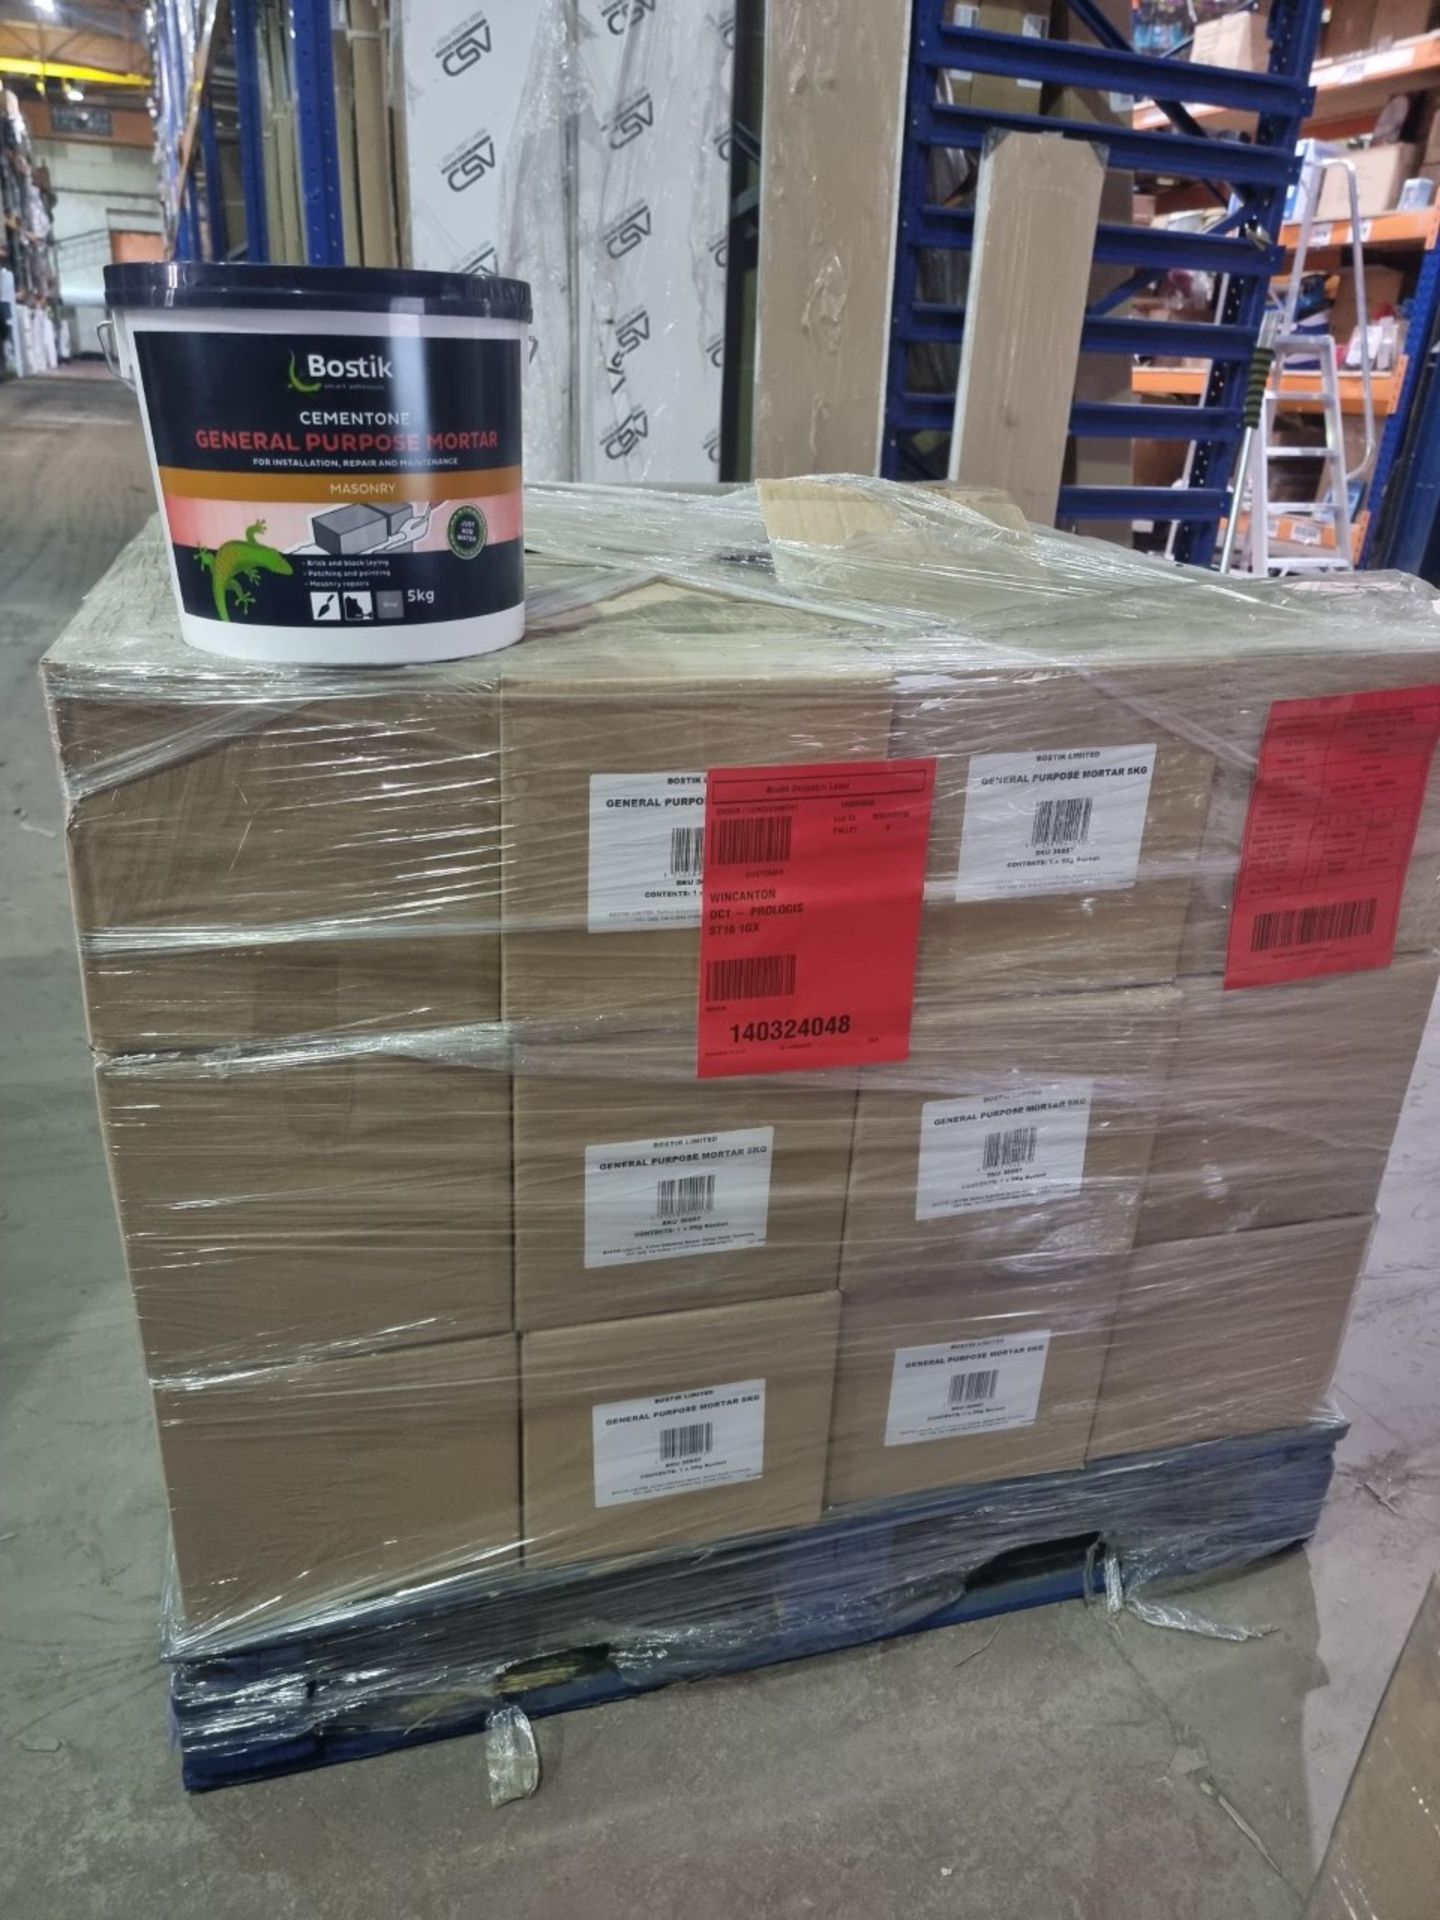 (B136) PALLET TO CONTAIN 60 x 5KG TUBS OF BOSTIK CEMENTONE GENERAL PURPOSE MORTAR - Image 2 of 2